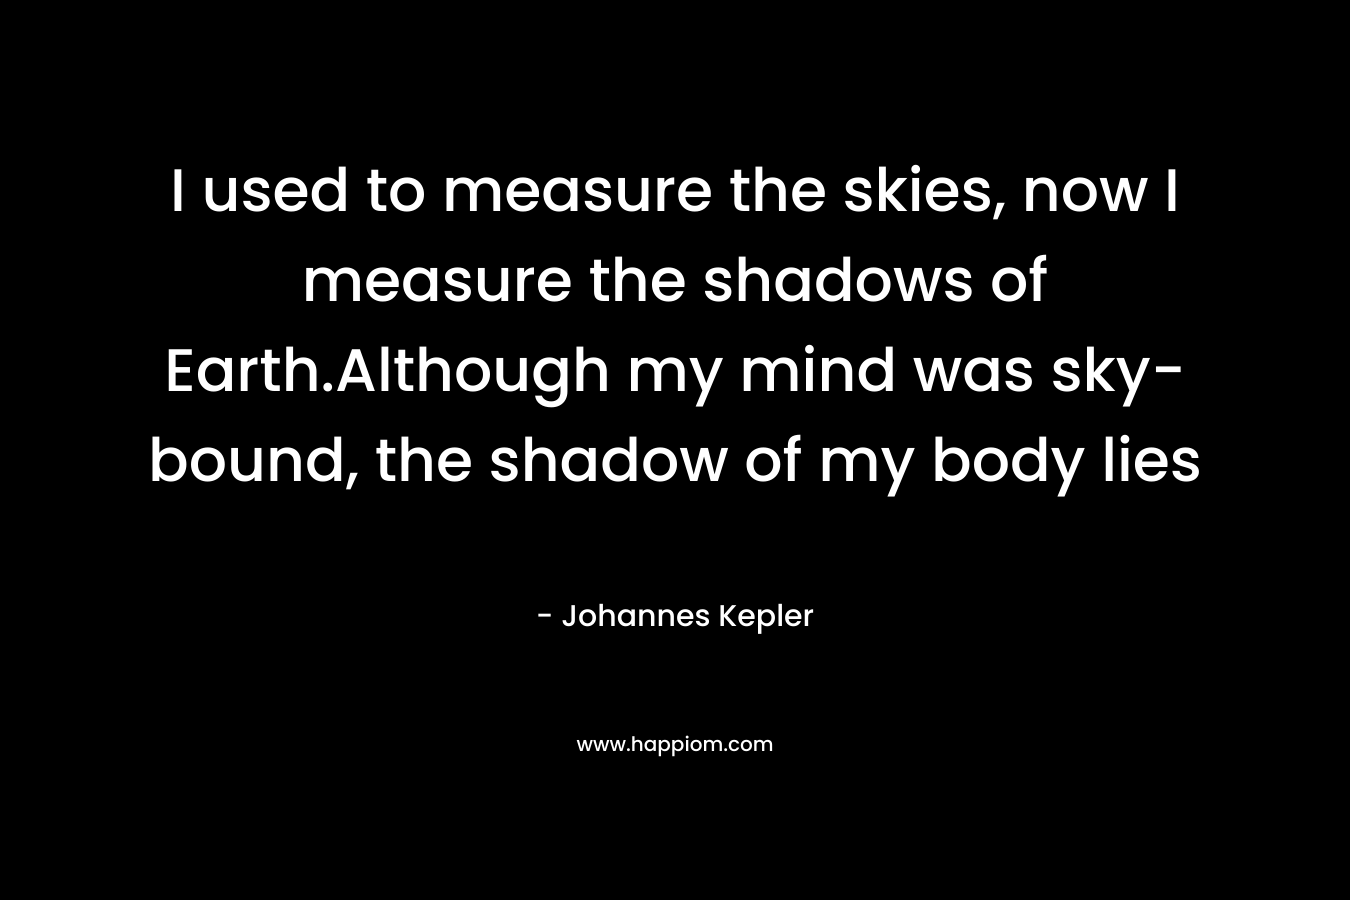 I used to measure the skies, now I measure the shadows of Earth.Although my mind was sky-bound, the shadow of my body lies